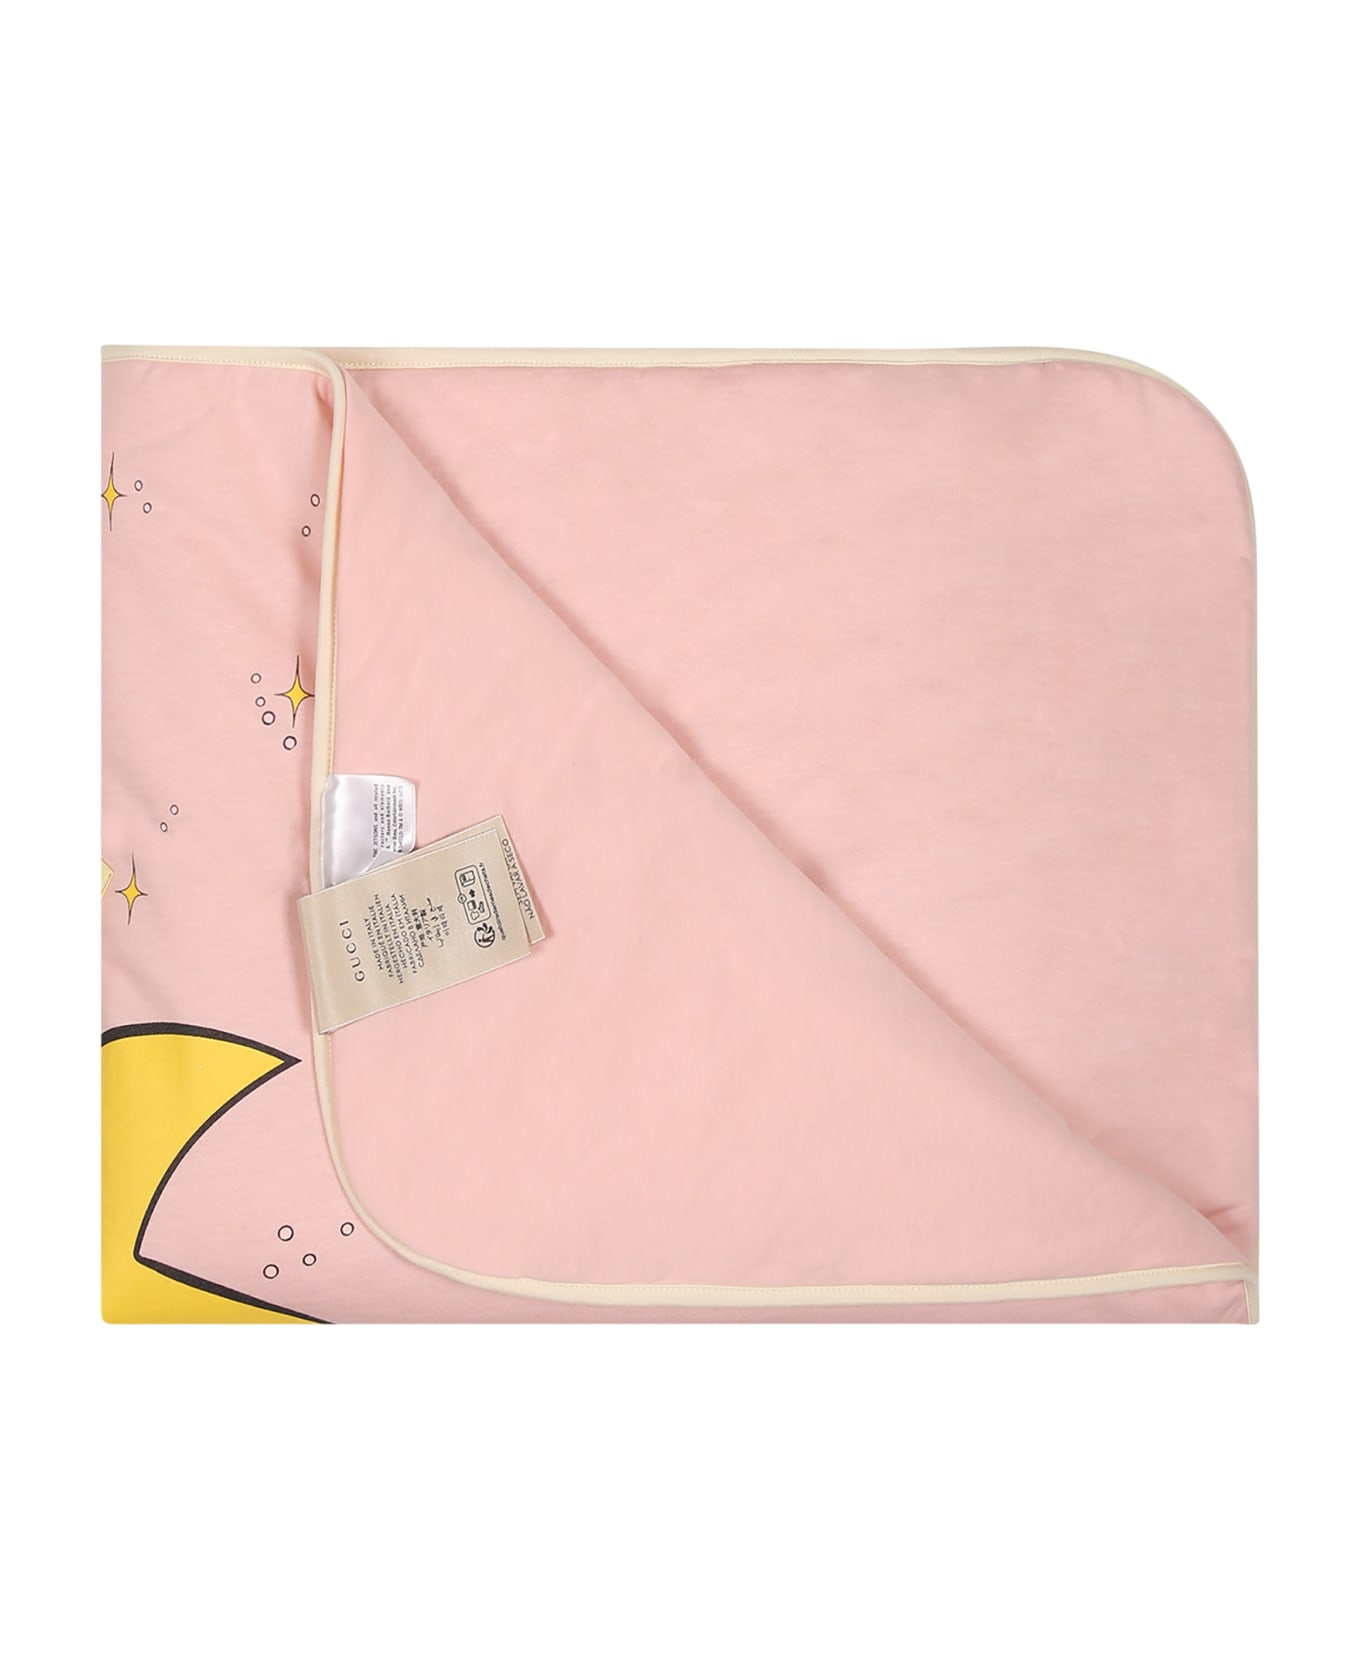 Gucci Pink Blanket For Baby Girl With Logo And Great-grandchildren Print - Pink